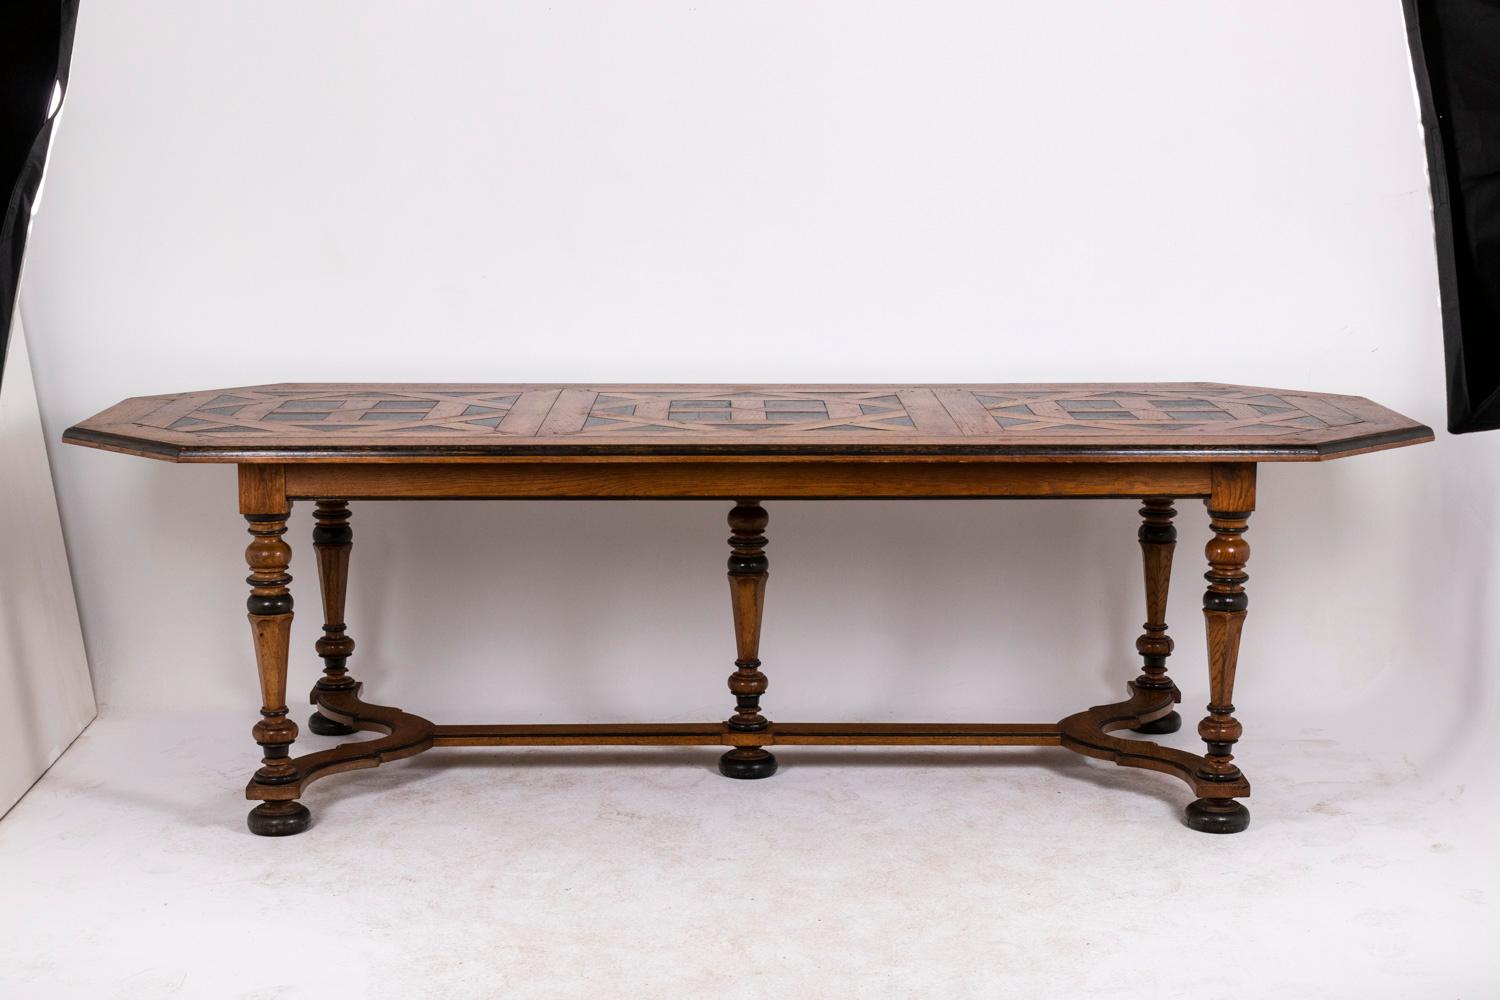 Louis XIV style dining room table in walnut, with its parquet top. It rests on a base consisting of five baluster-shaped feet in turned wood supported by five round flattened feet, joined by a fretted spacer.

French work realized circa